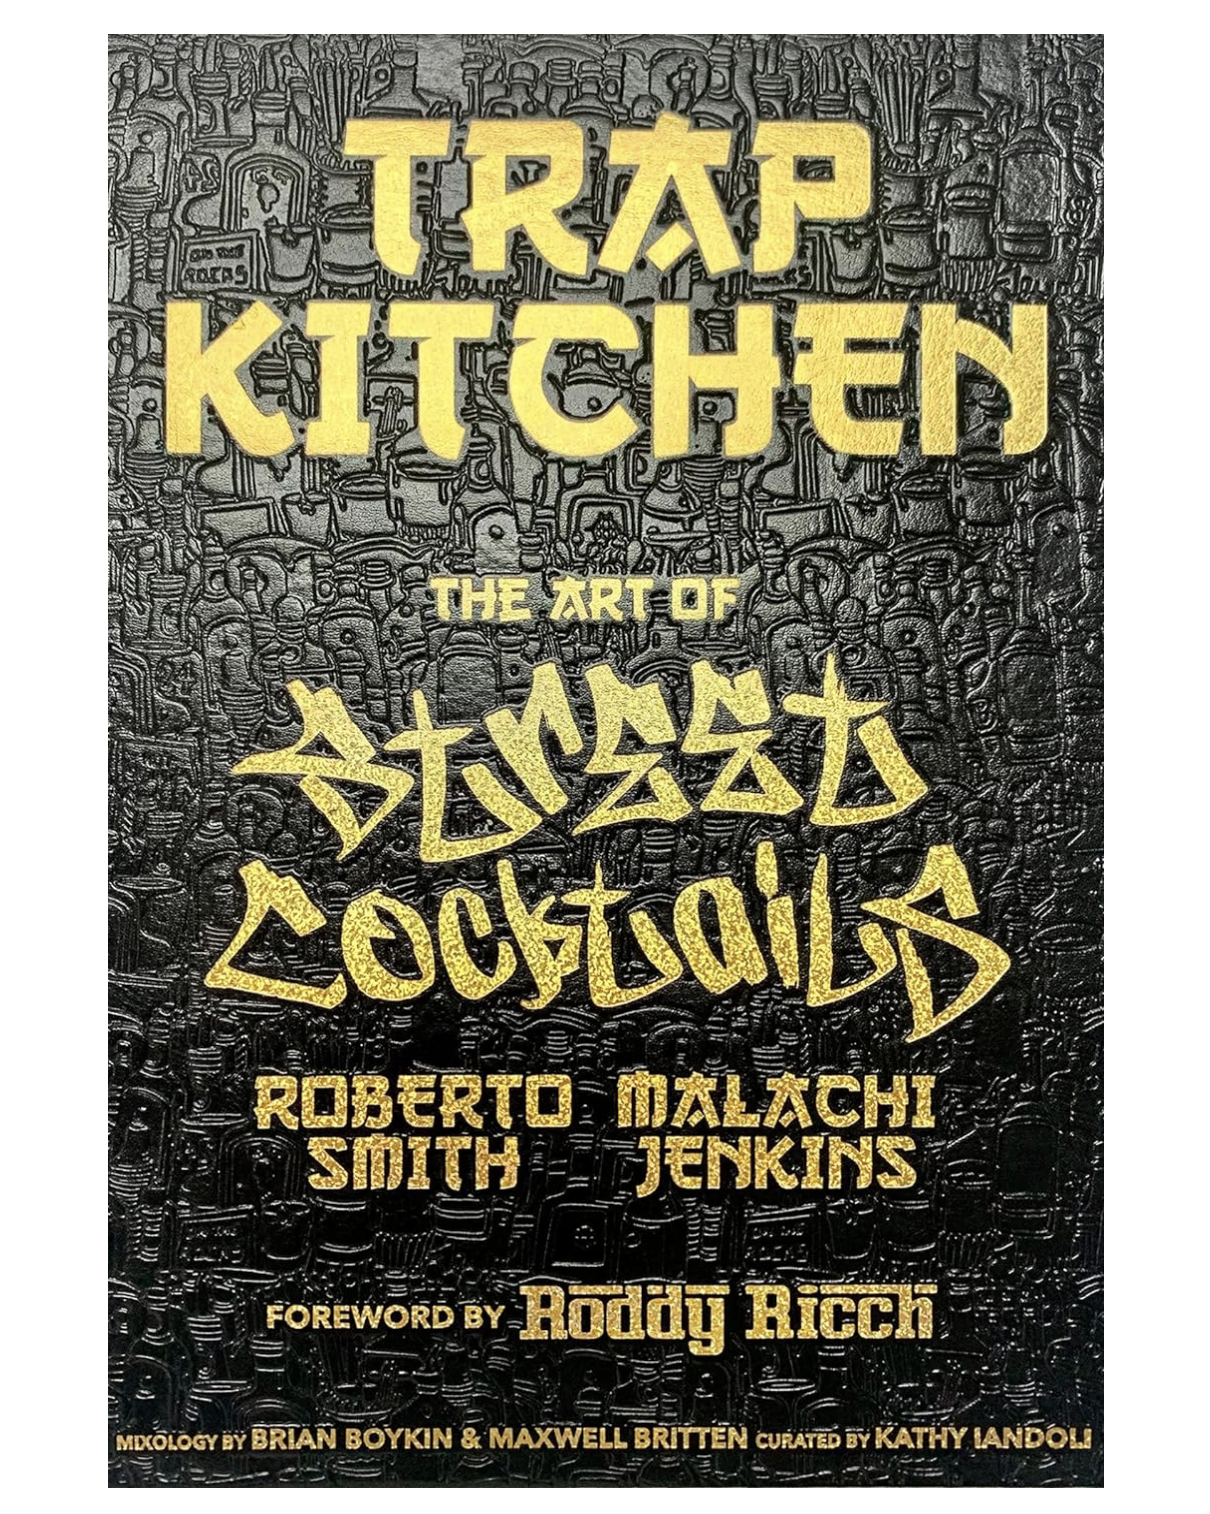 Trap Kitchen: The Art of Street Cocktails